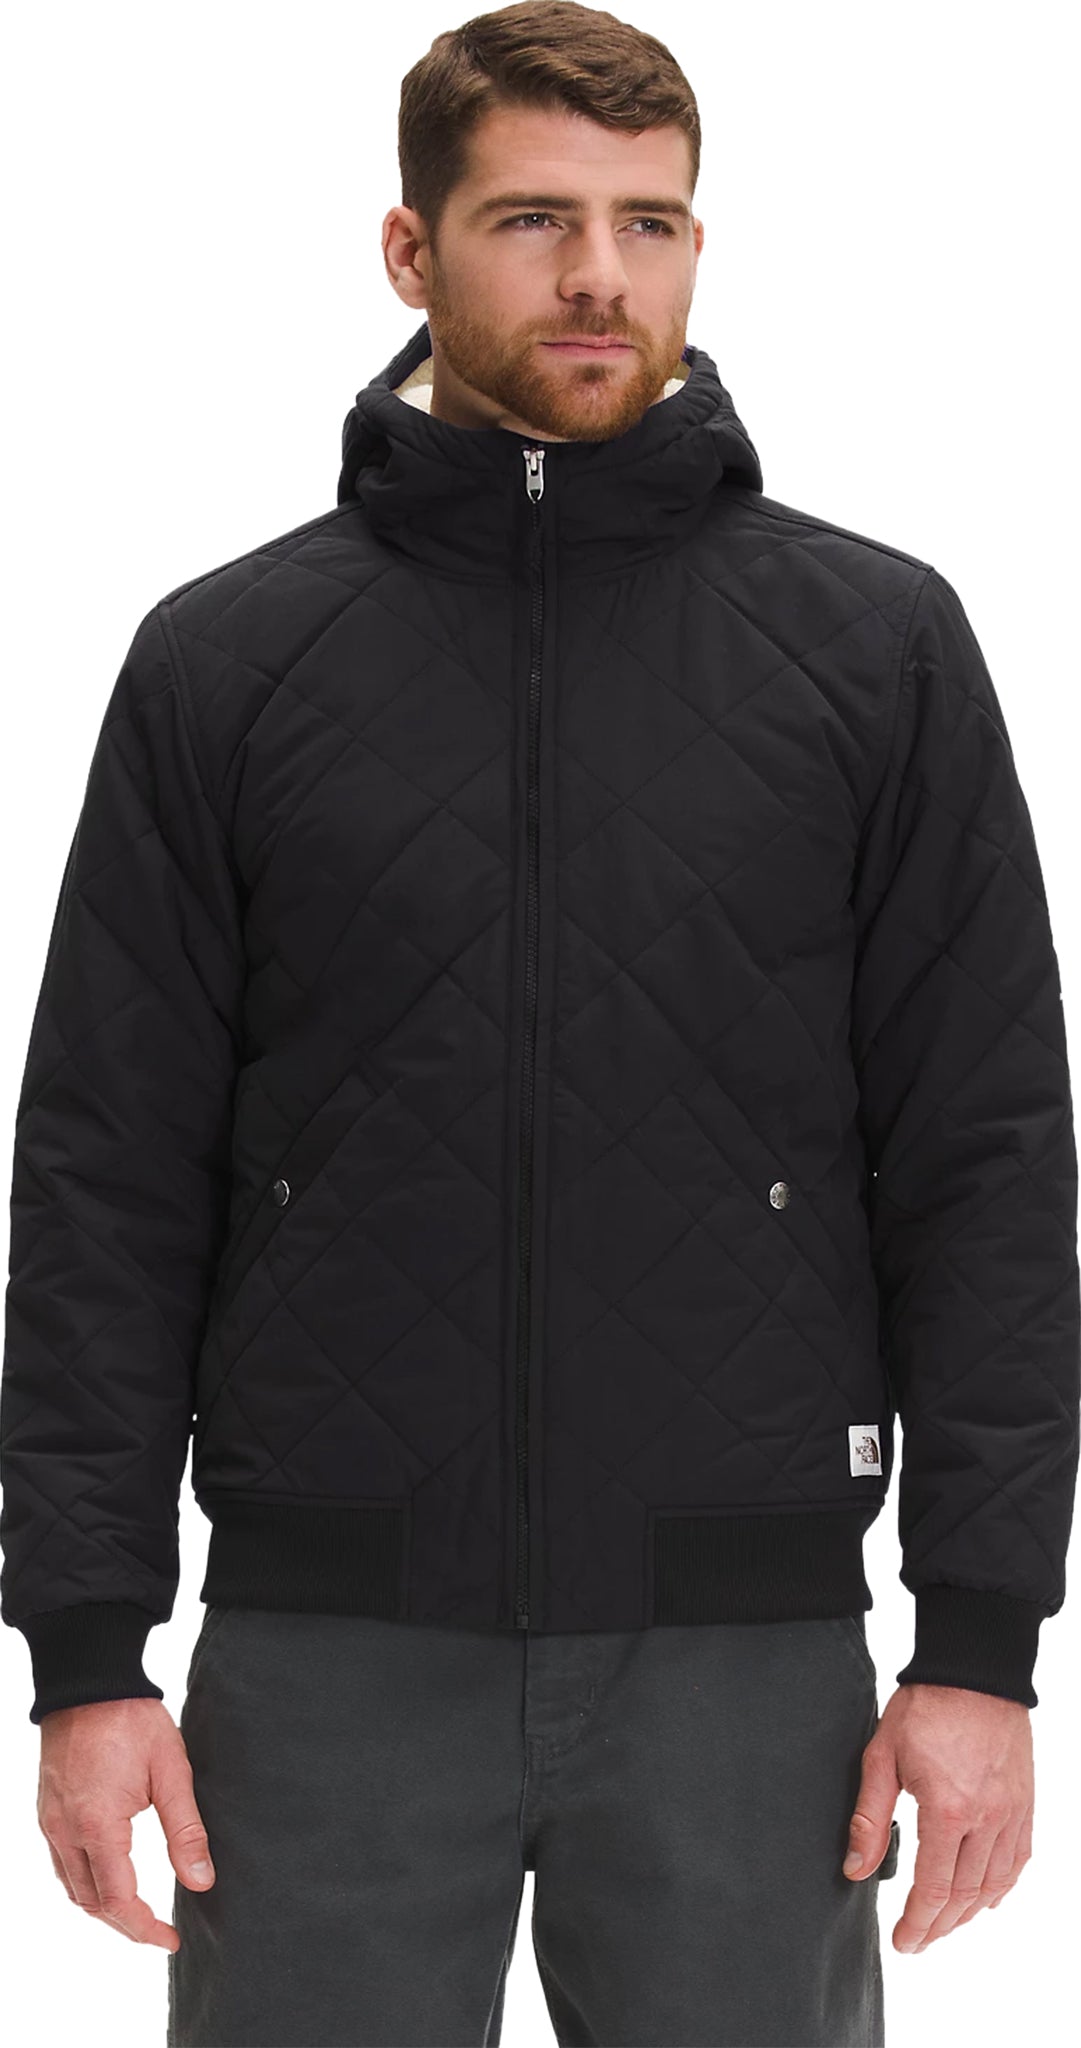 The North Face Cuchillo Insulated Full-Zip Hoodie - Men’s